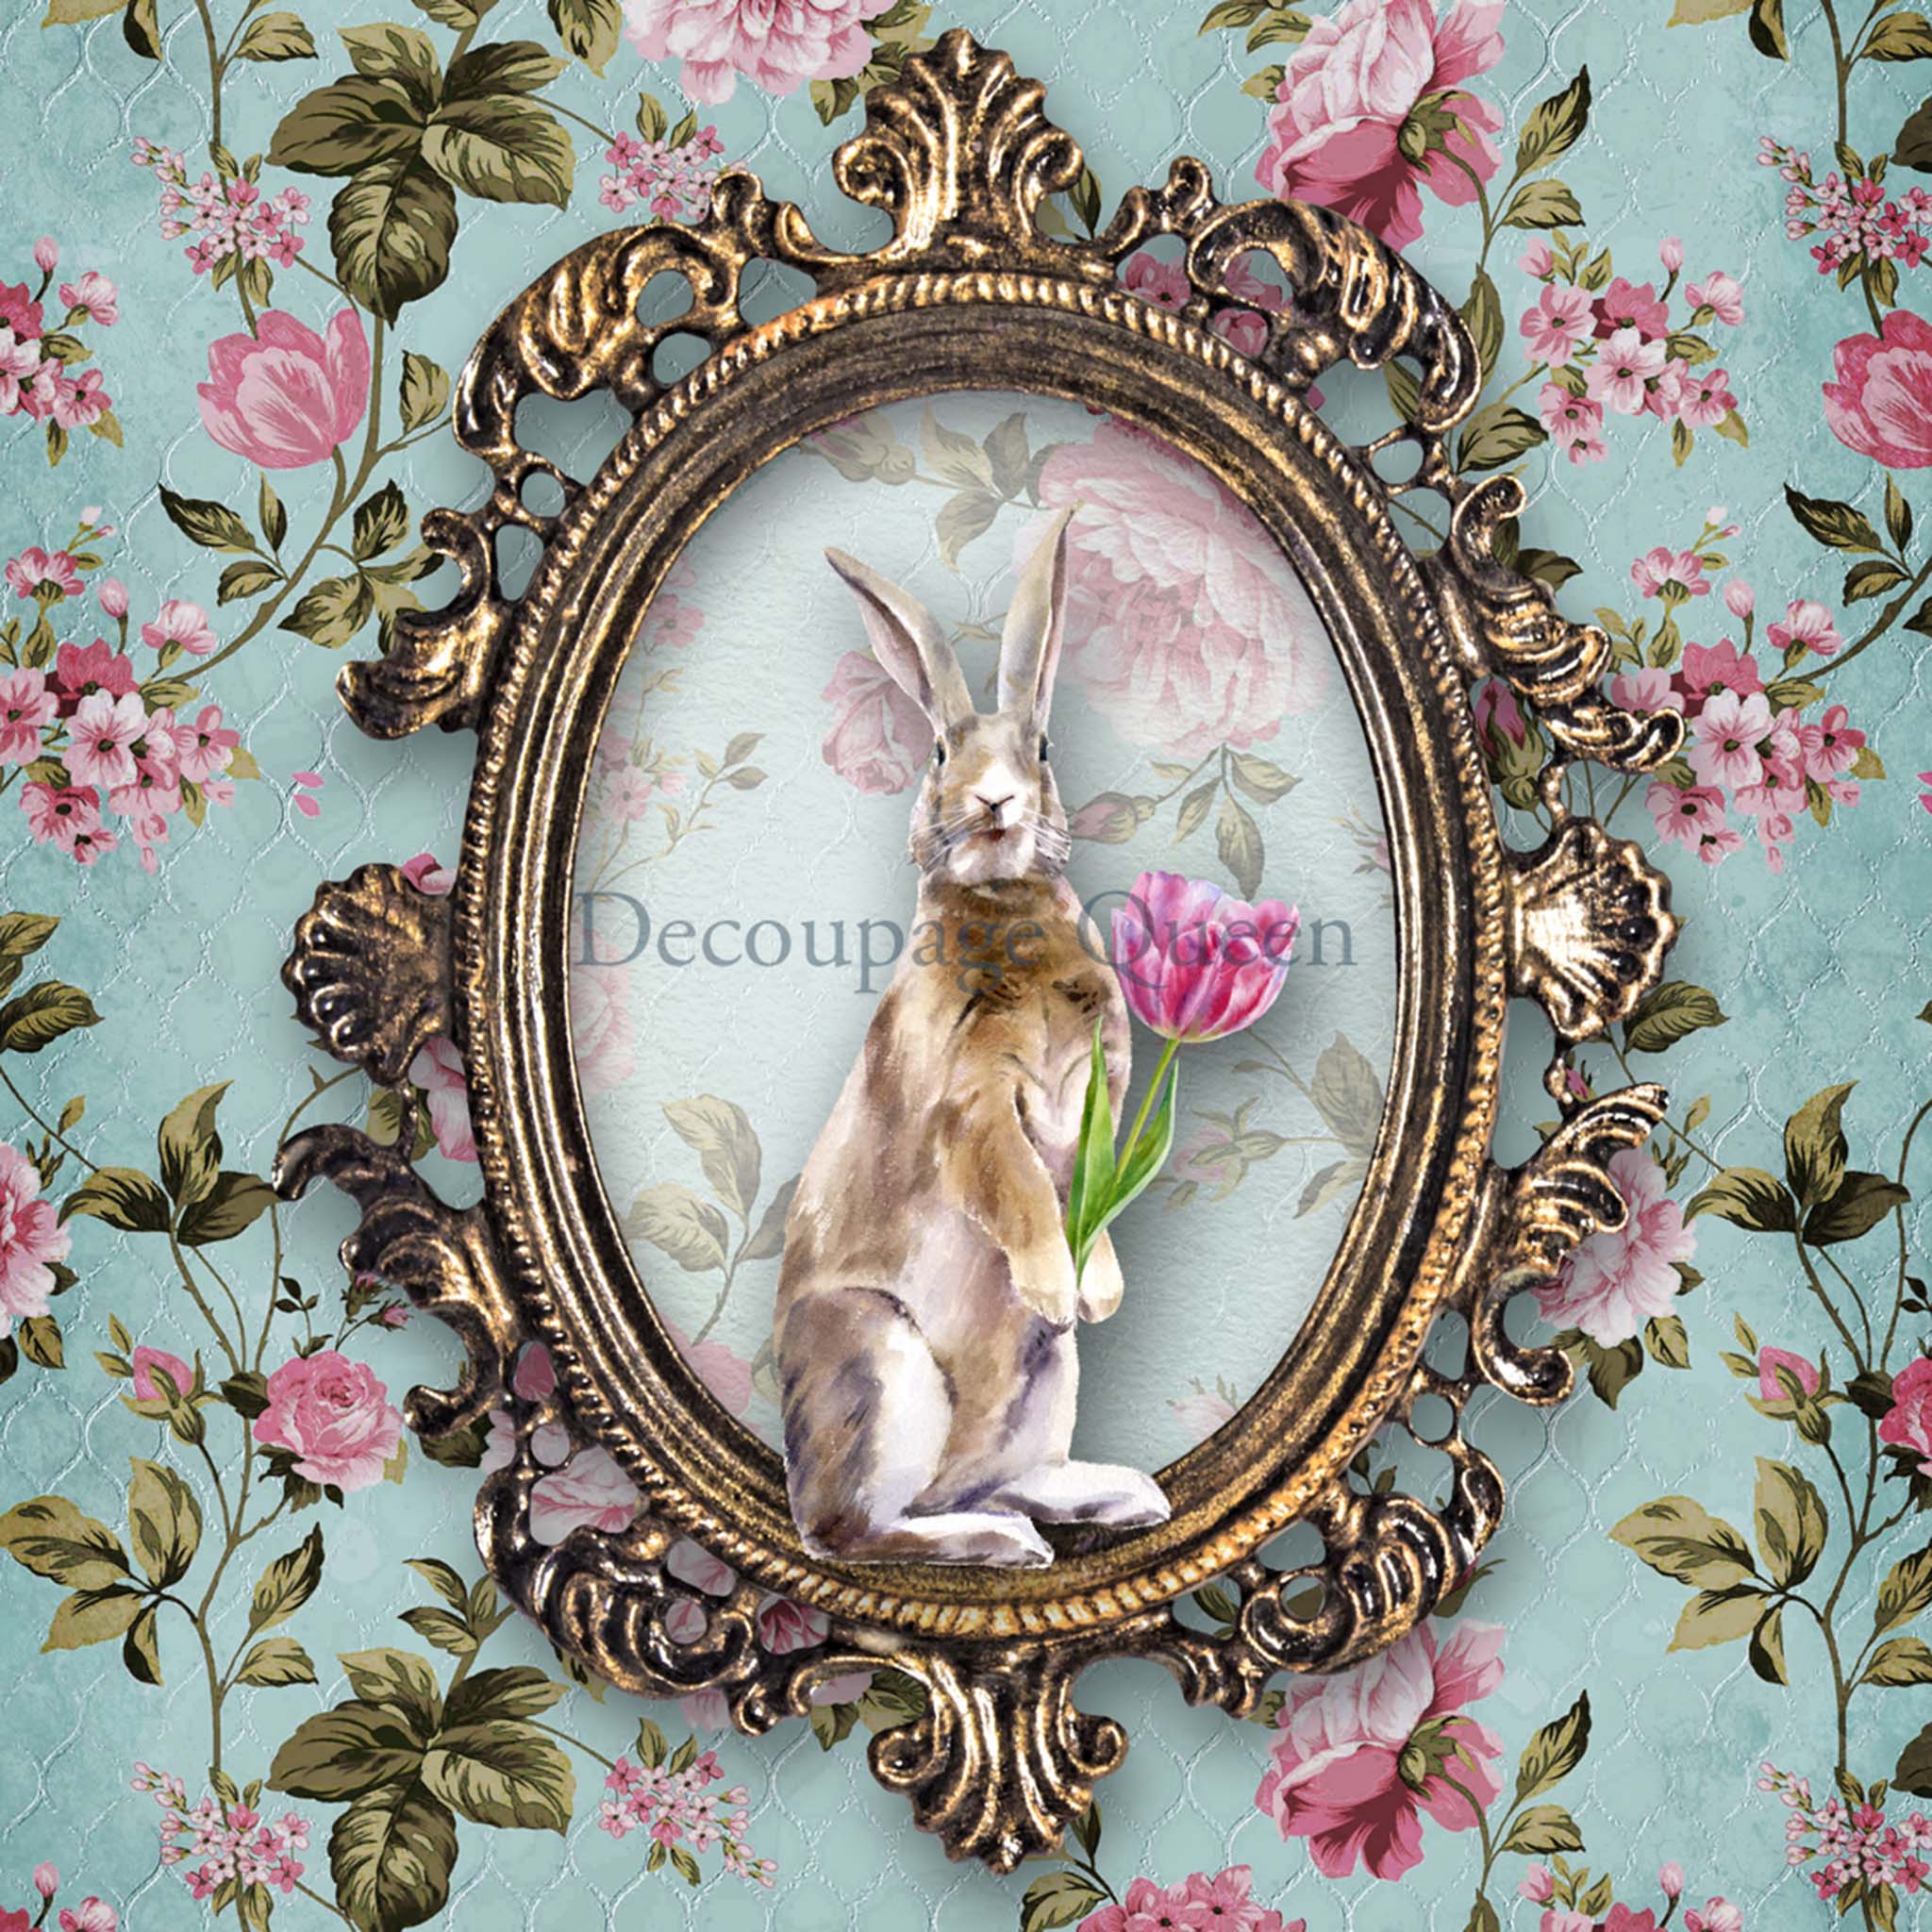 Close-up of an A1 rice paper design that features a charming brown bunny holding a tulip in an ornate frame, surrounded by pink flowers on an aqua background. 